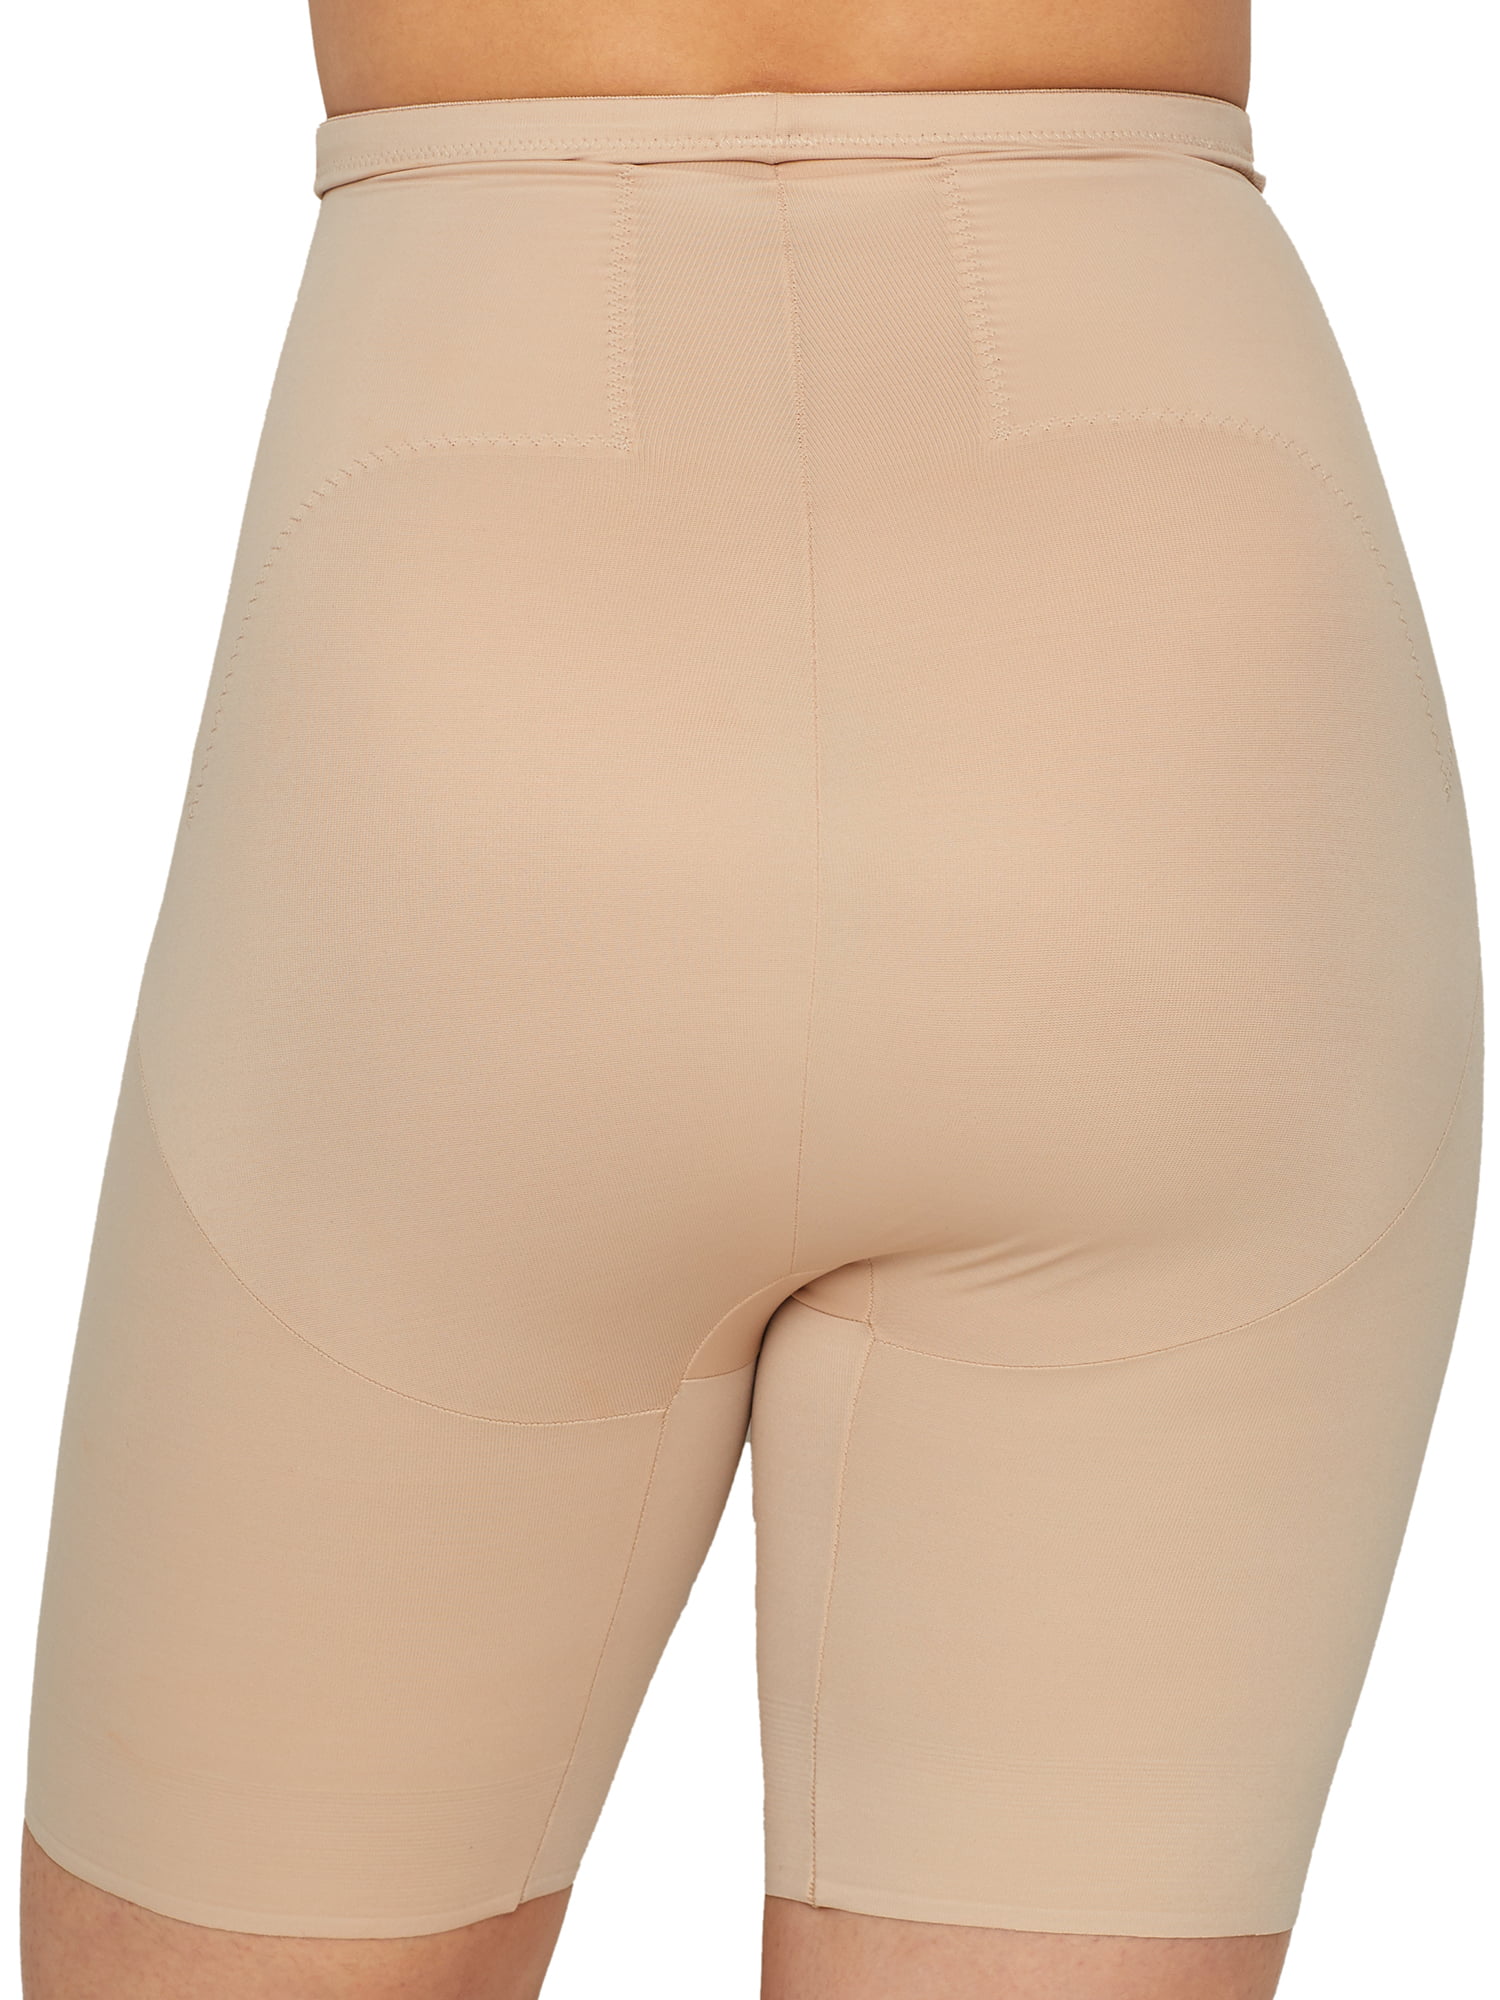 Womens Plus Size Flexible Fit Firm Control Thigh Slimmer Style-2939 - Walmart.com